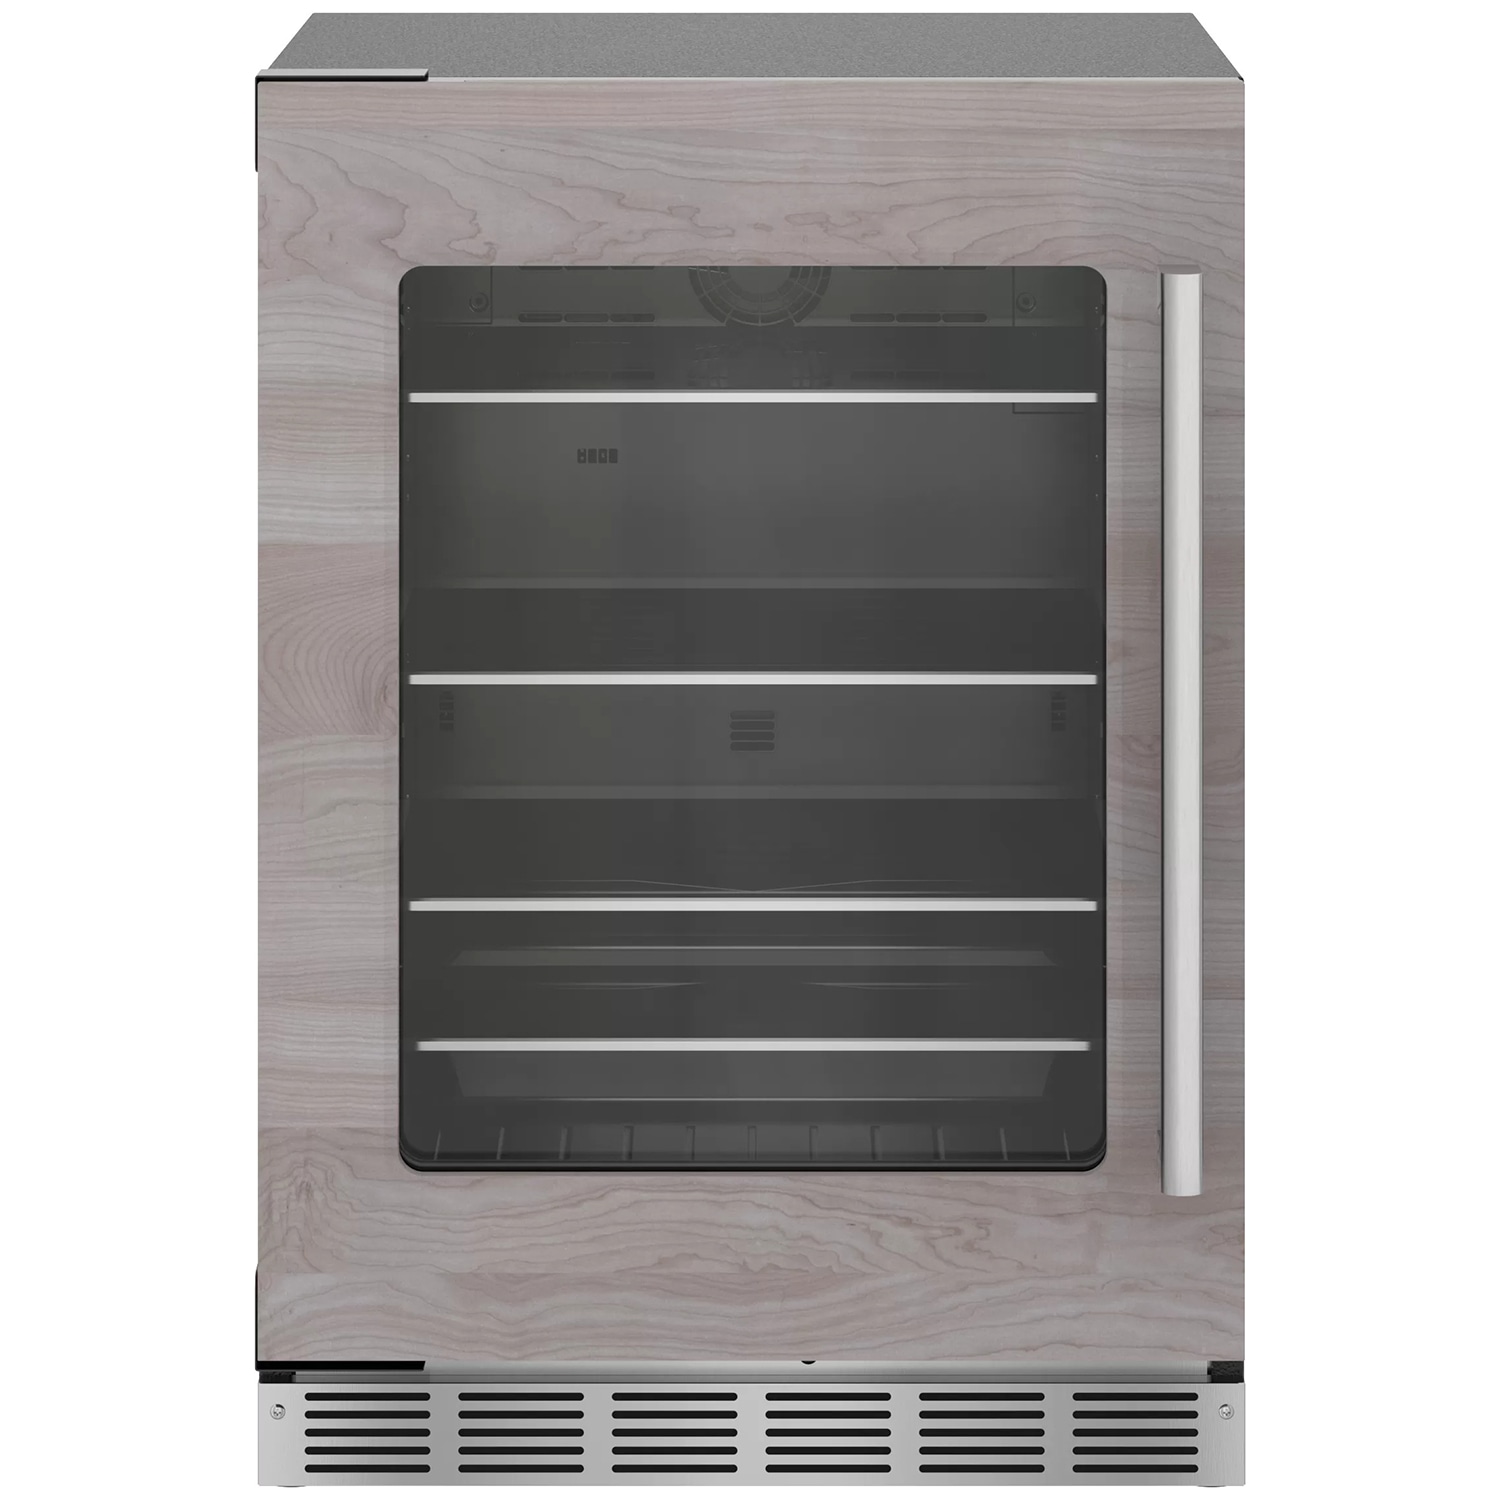 Thermador 24" 4.9 Cu. Ft. Beverage Center with Digital Control - Custom Panel Required (T24UR905LP)